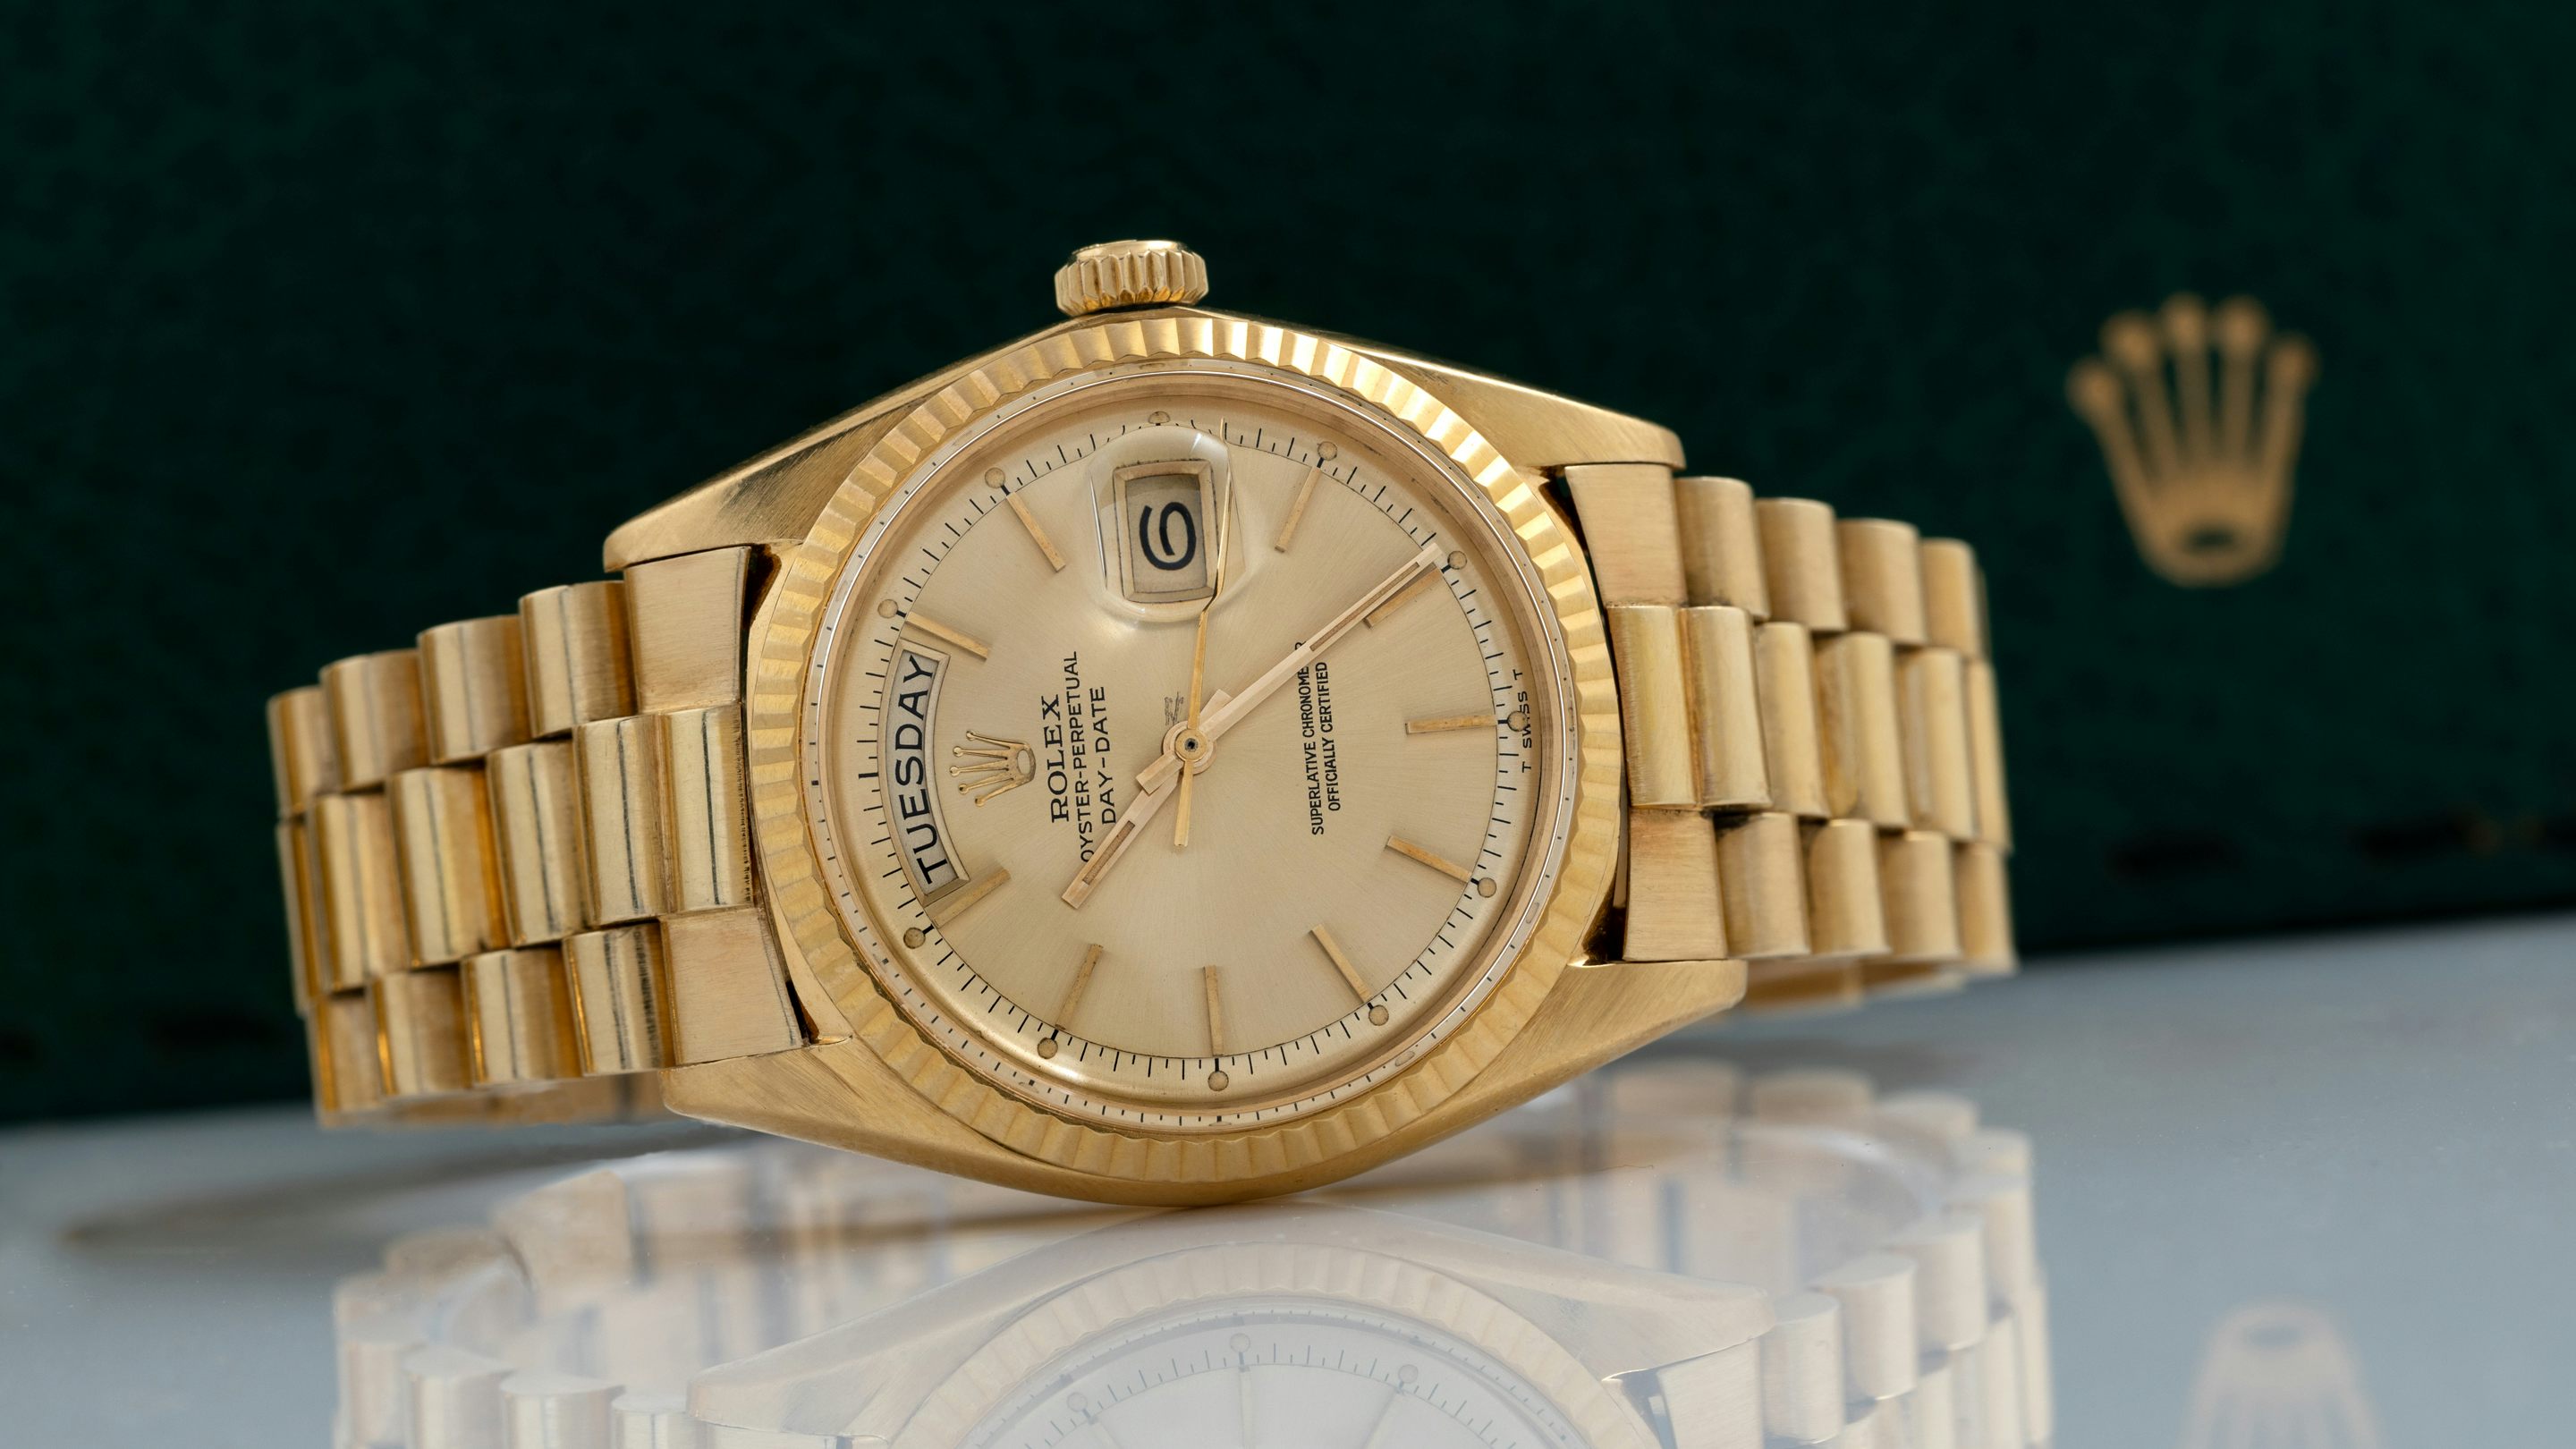 Caina School Rep Video Whach - Grails: The Long Wait To Own A Rolex Day-Date